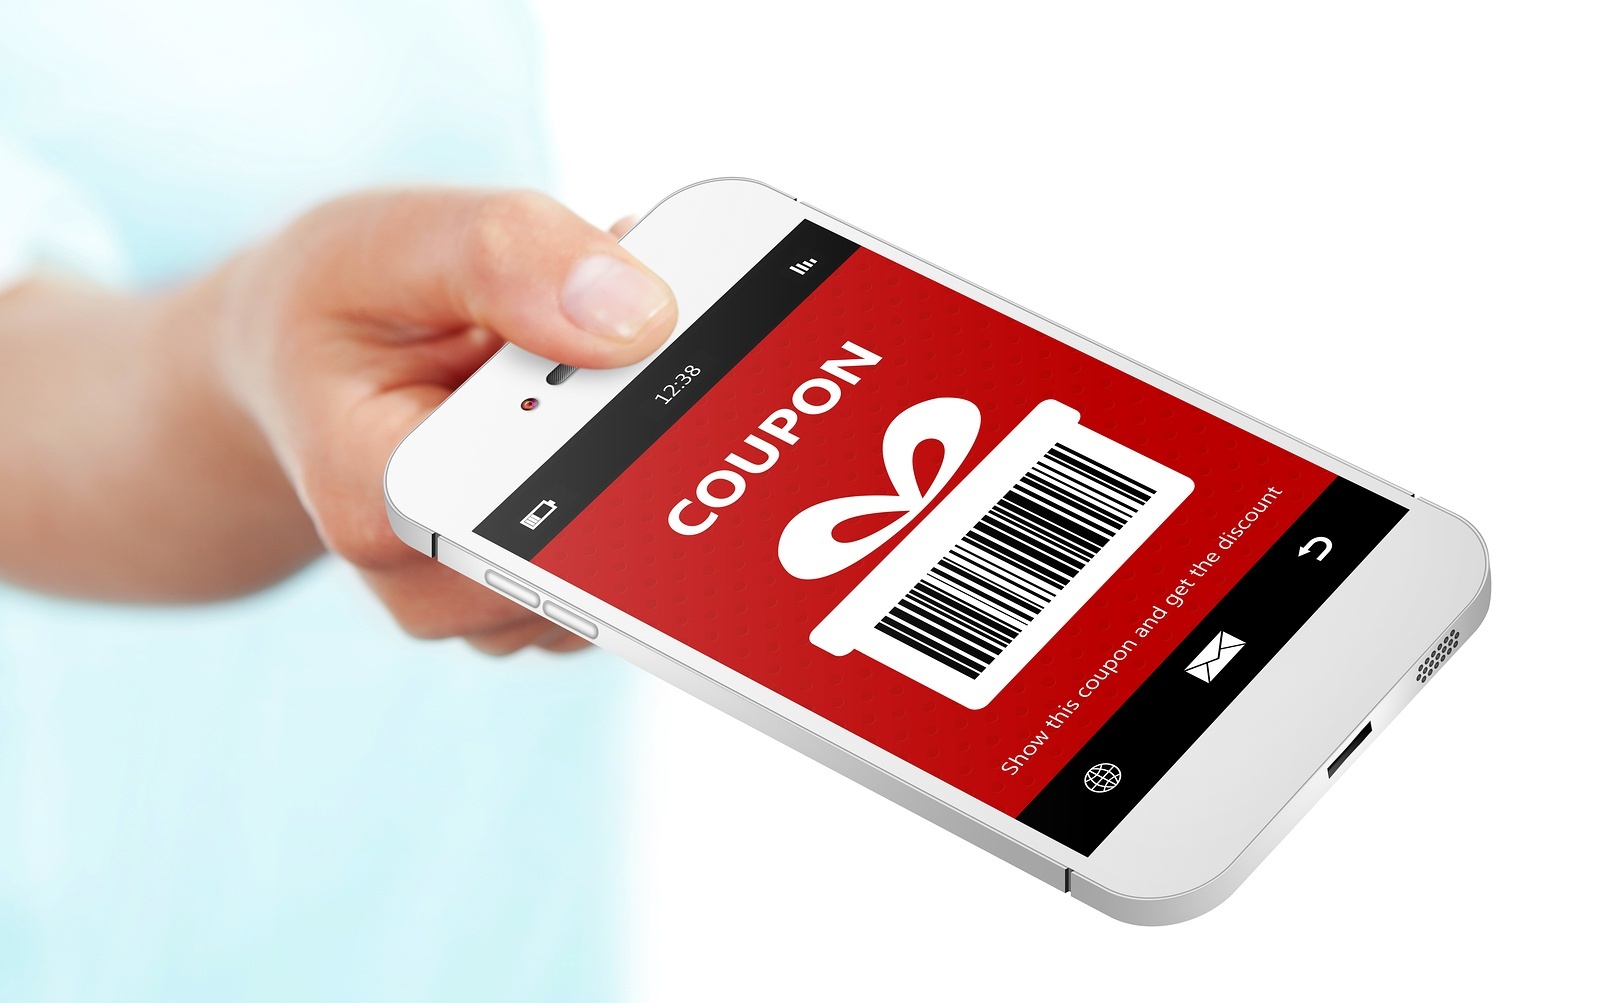 Discover Apps that Provide Coupons and Other Offers